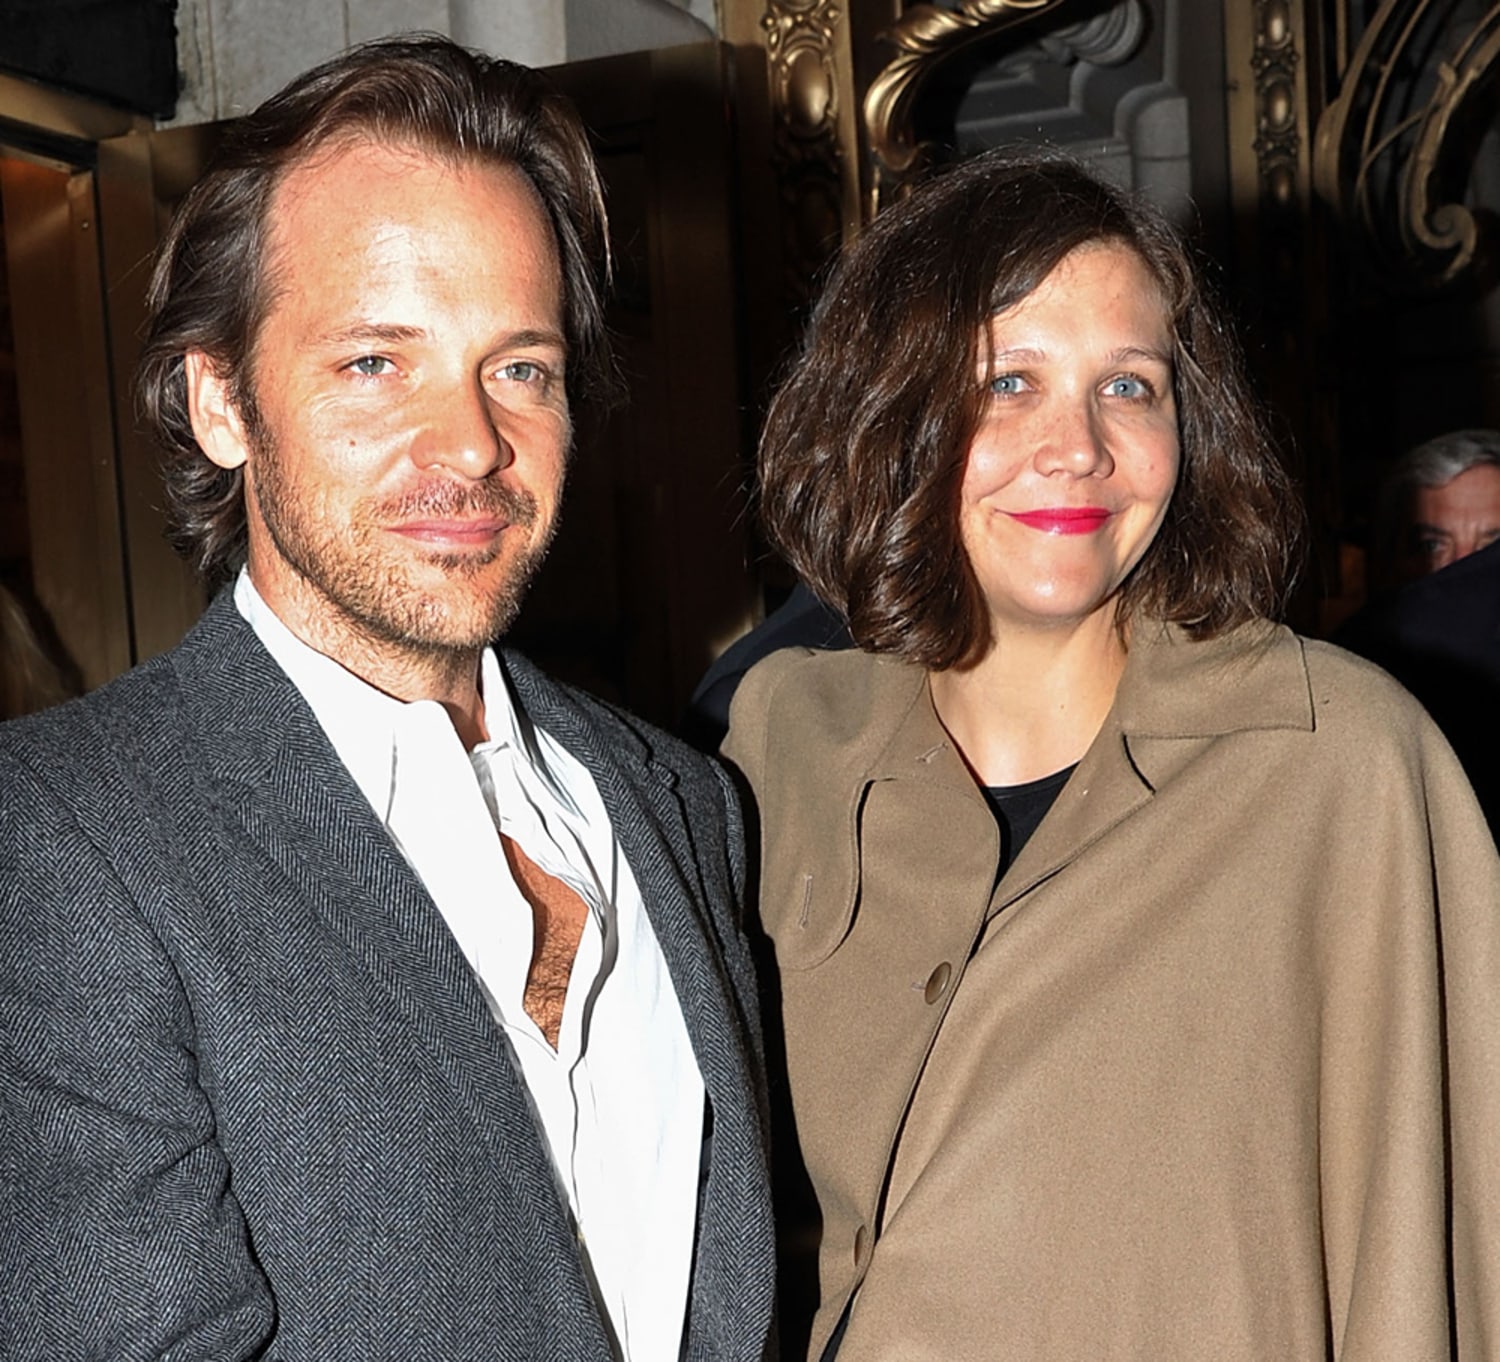 How to watch and stream Peter Sarsgaard movies and TV shows